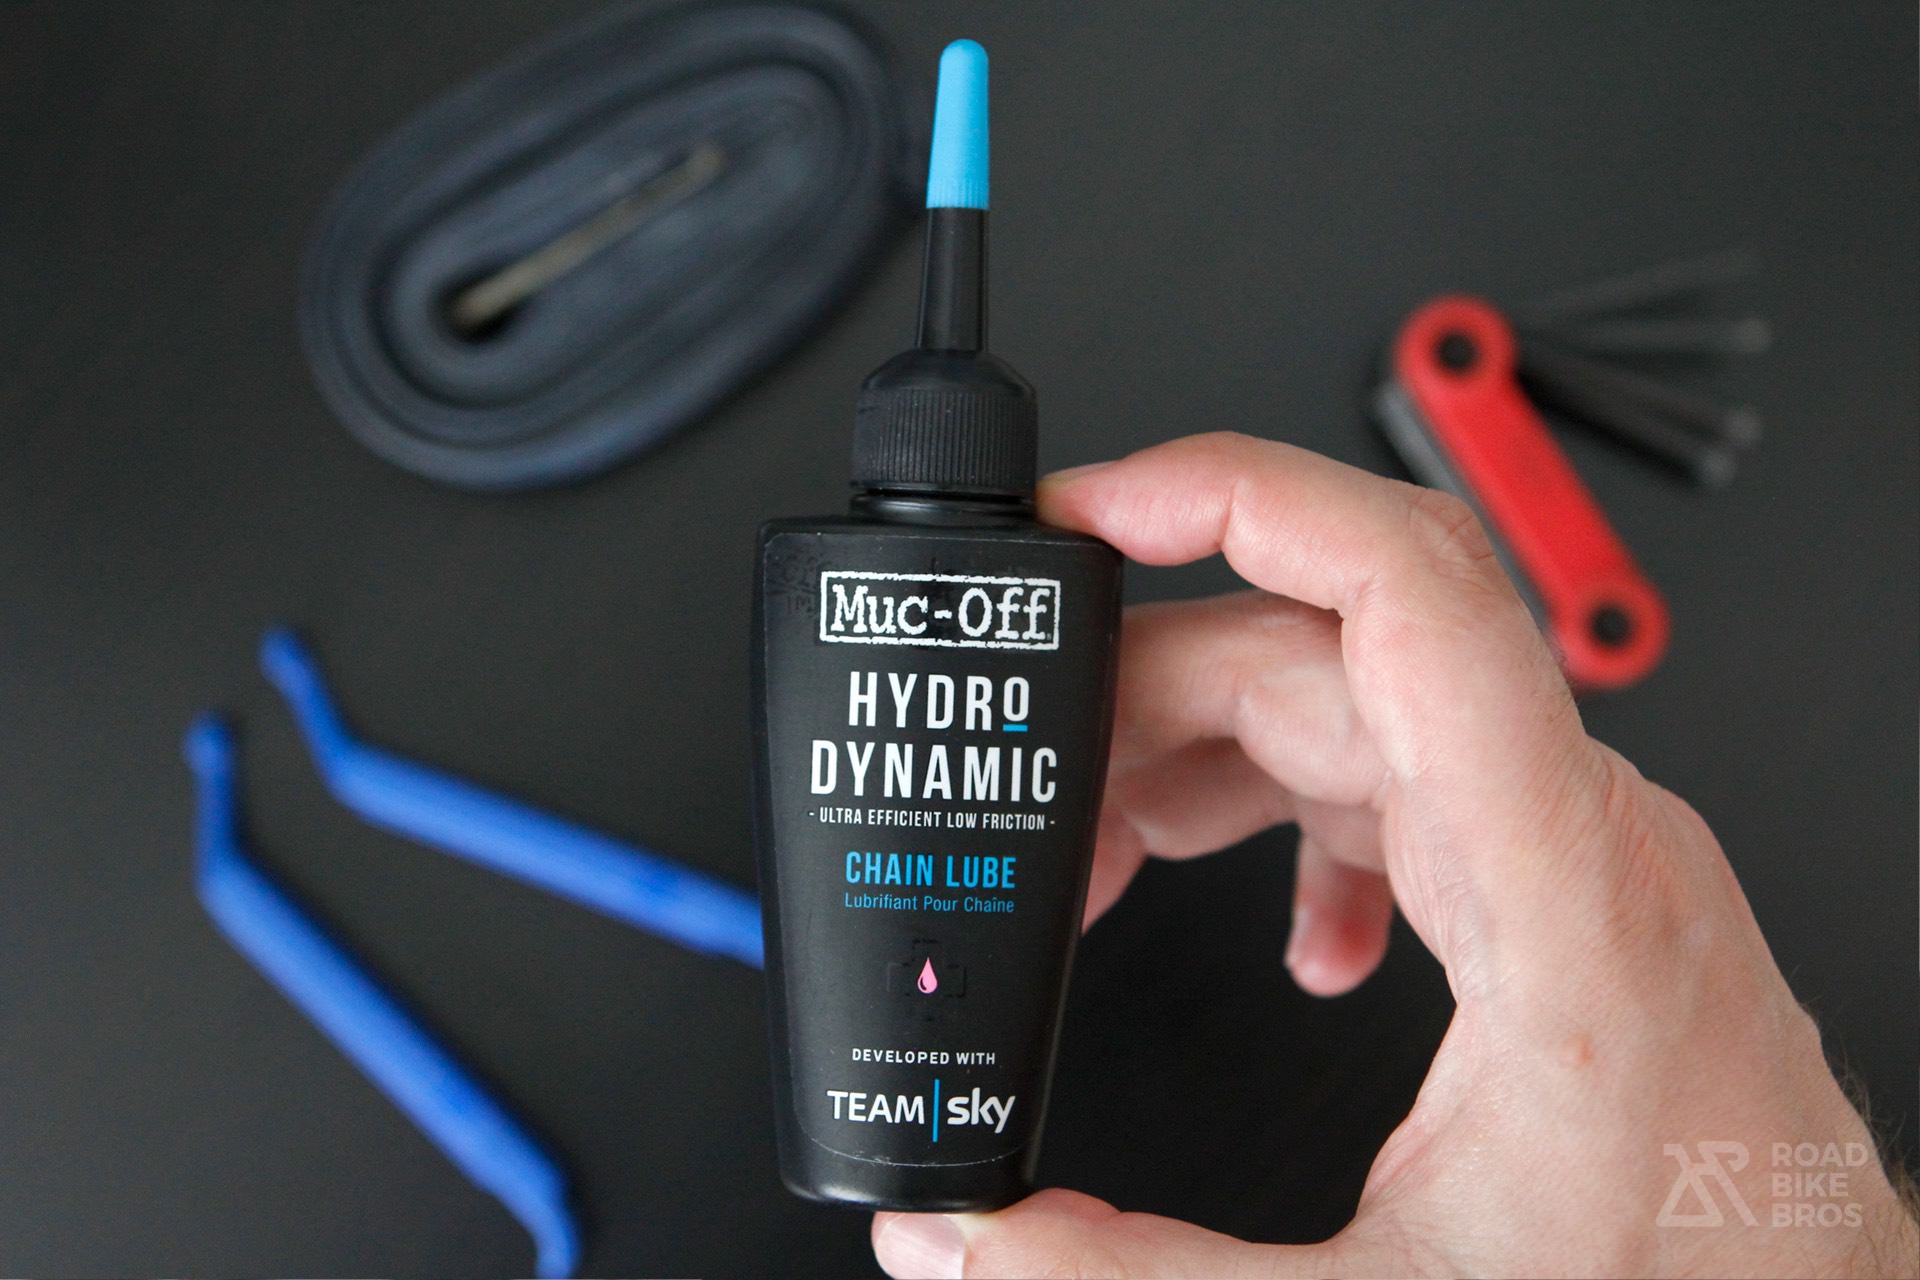 muc-off-team-sky-hydrodynamic-chain-lube-oil-review-package-design-tools